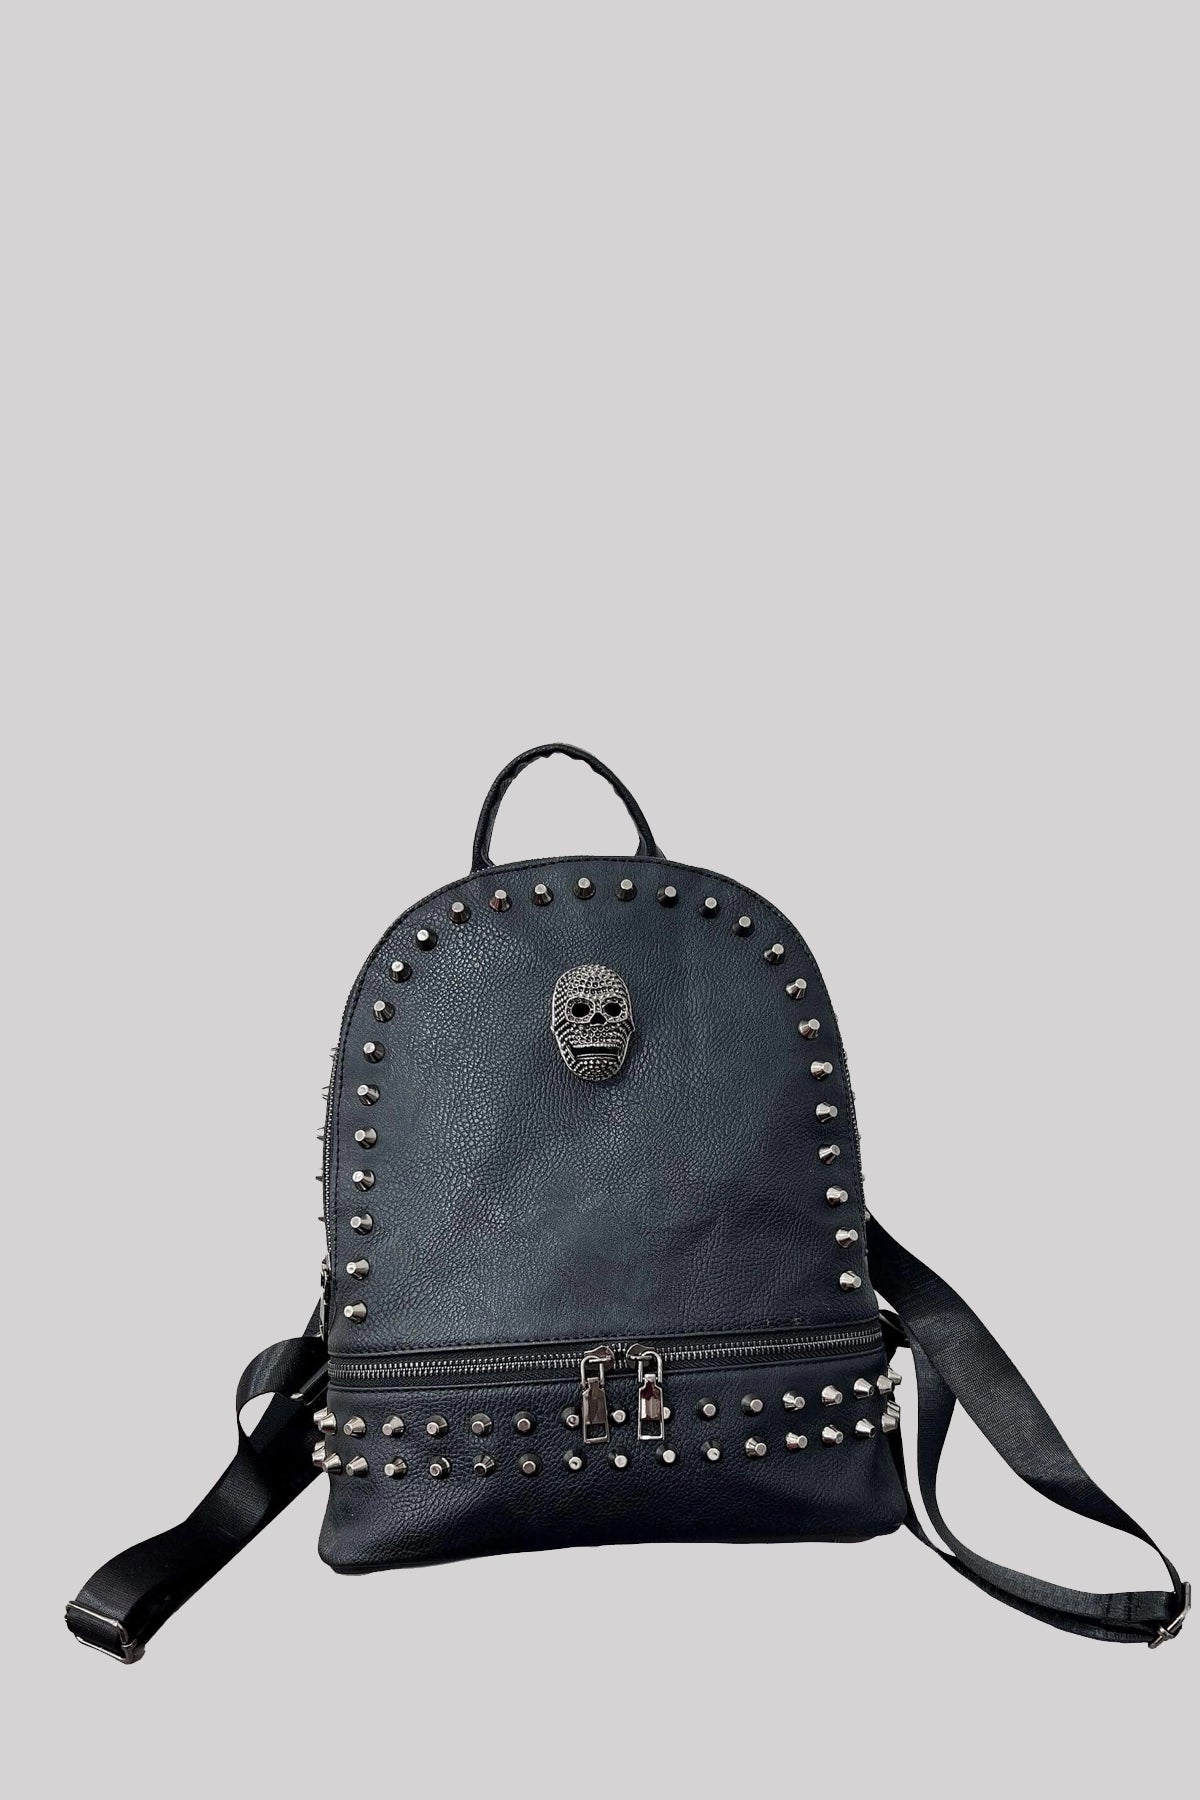 Ro Rox Dade Skeleton Gothic Canvas Backpack Bag